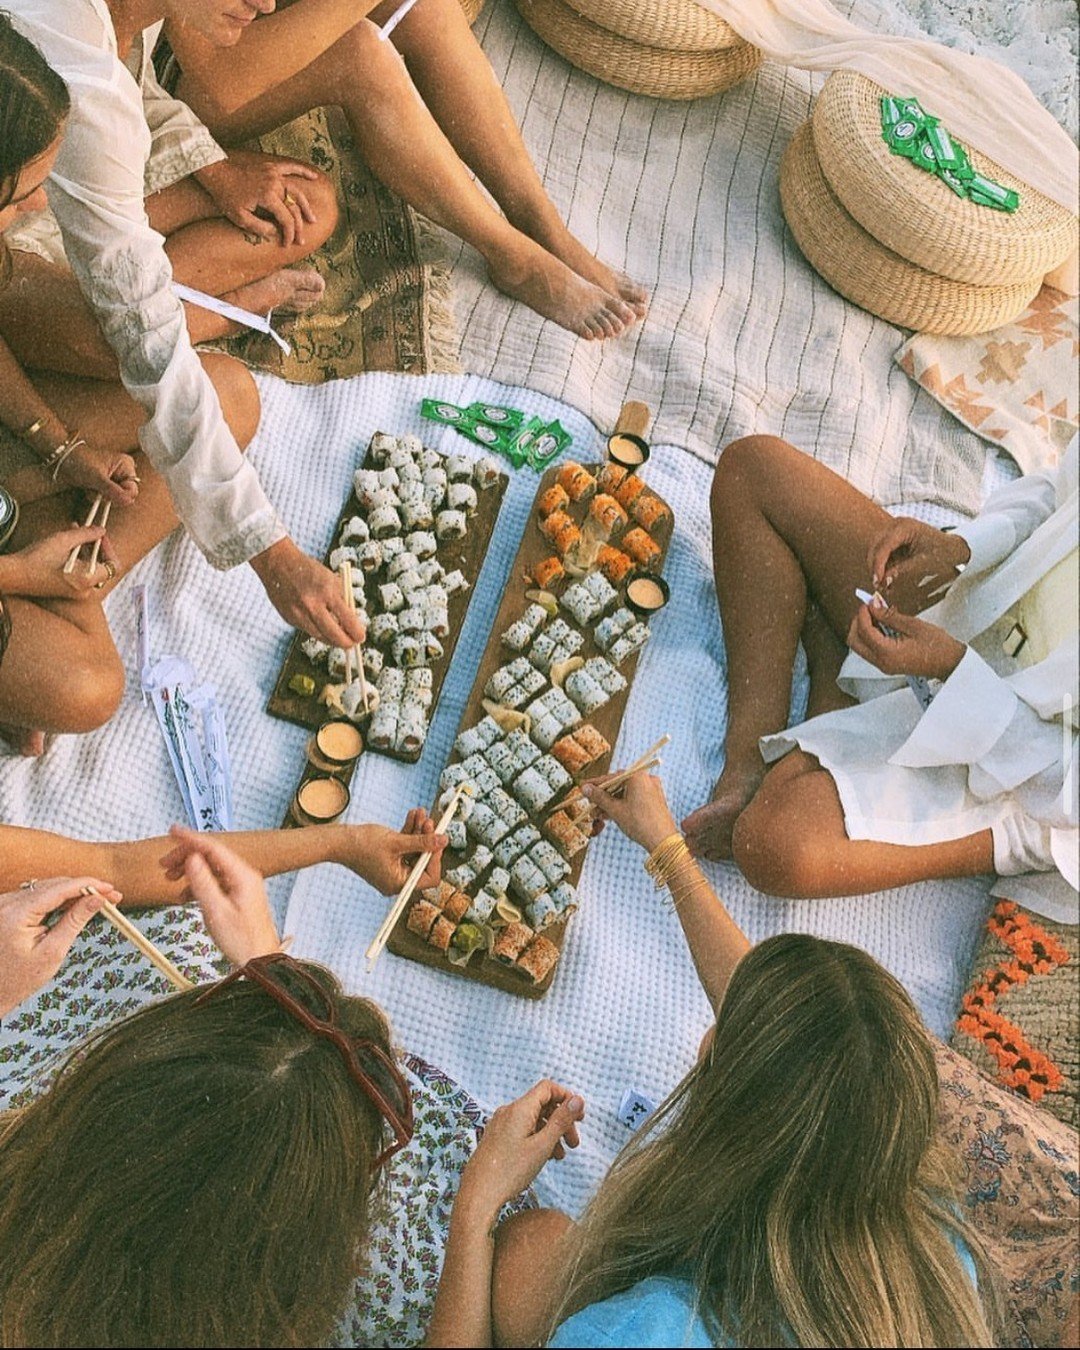 Planning a bachelorette trip? Our sushi catering boards are a must!

Order yours 👉 link in bio

📸 @coastlinepicnics